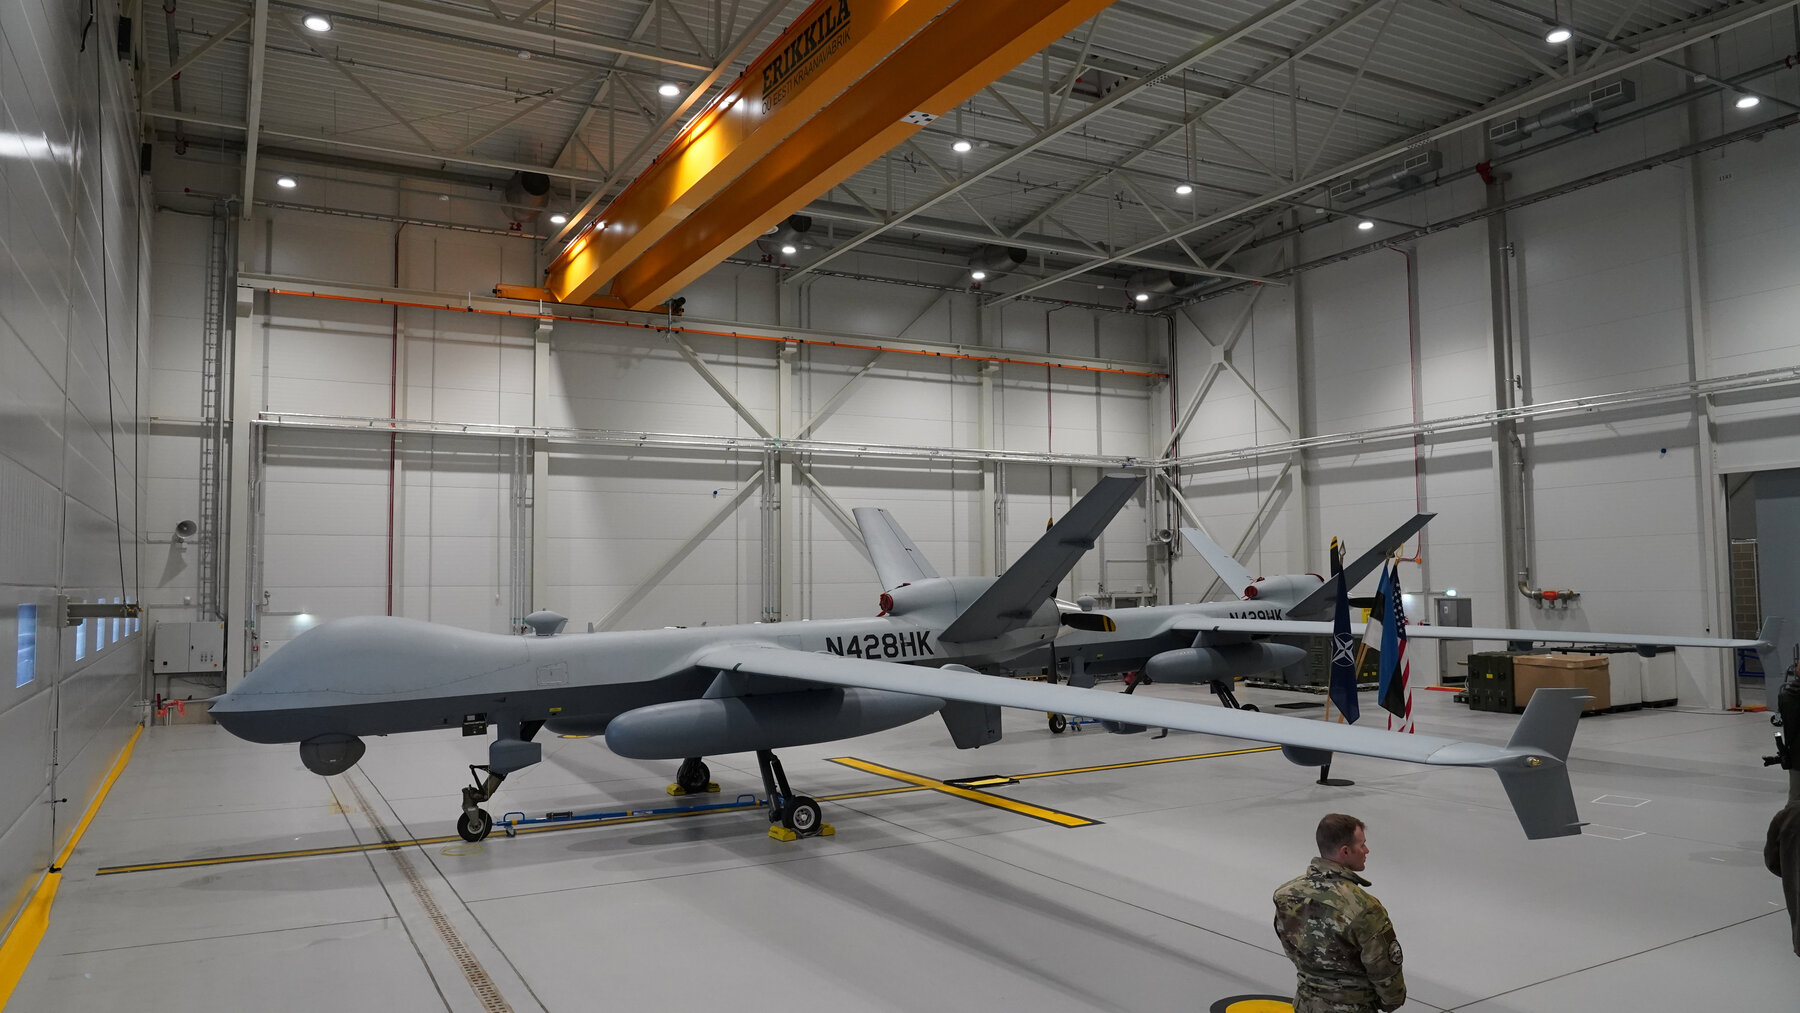 Trump Administration Is Bypassing Arms Control Pact to Sell Large Armed Drones